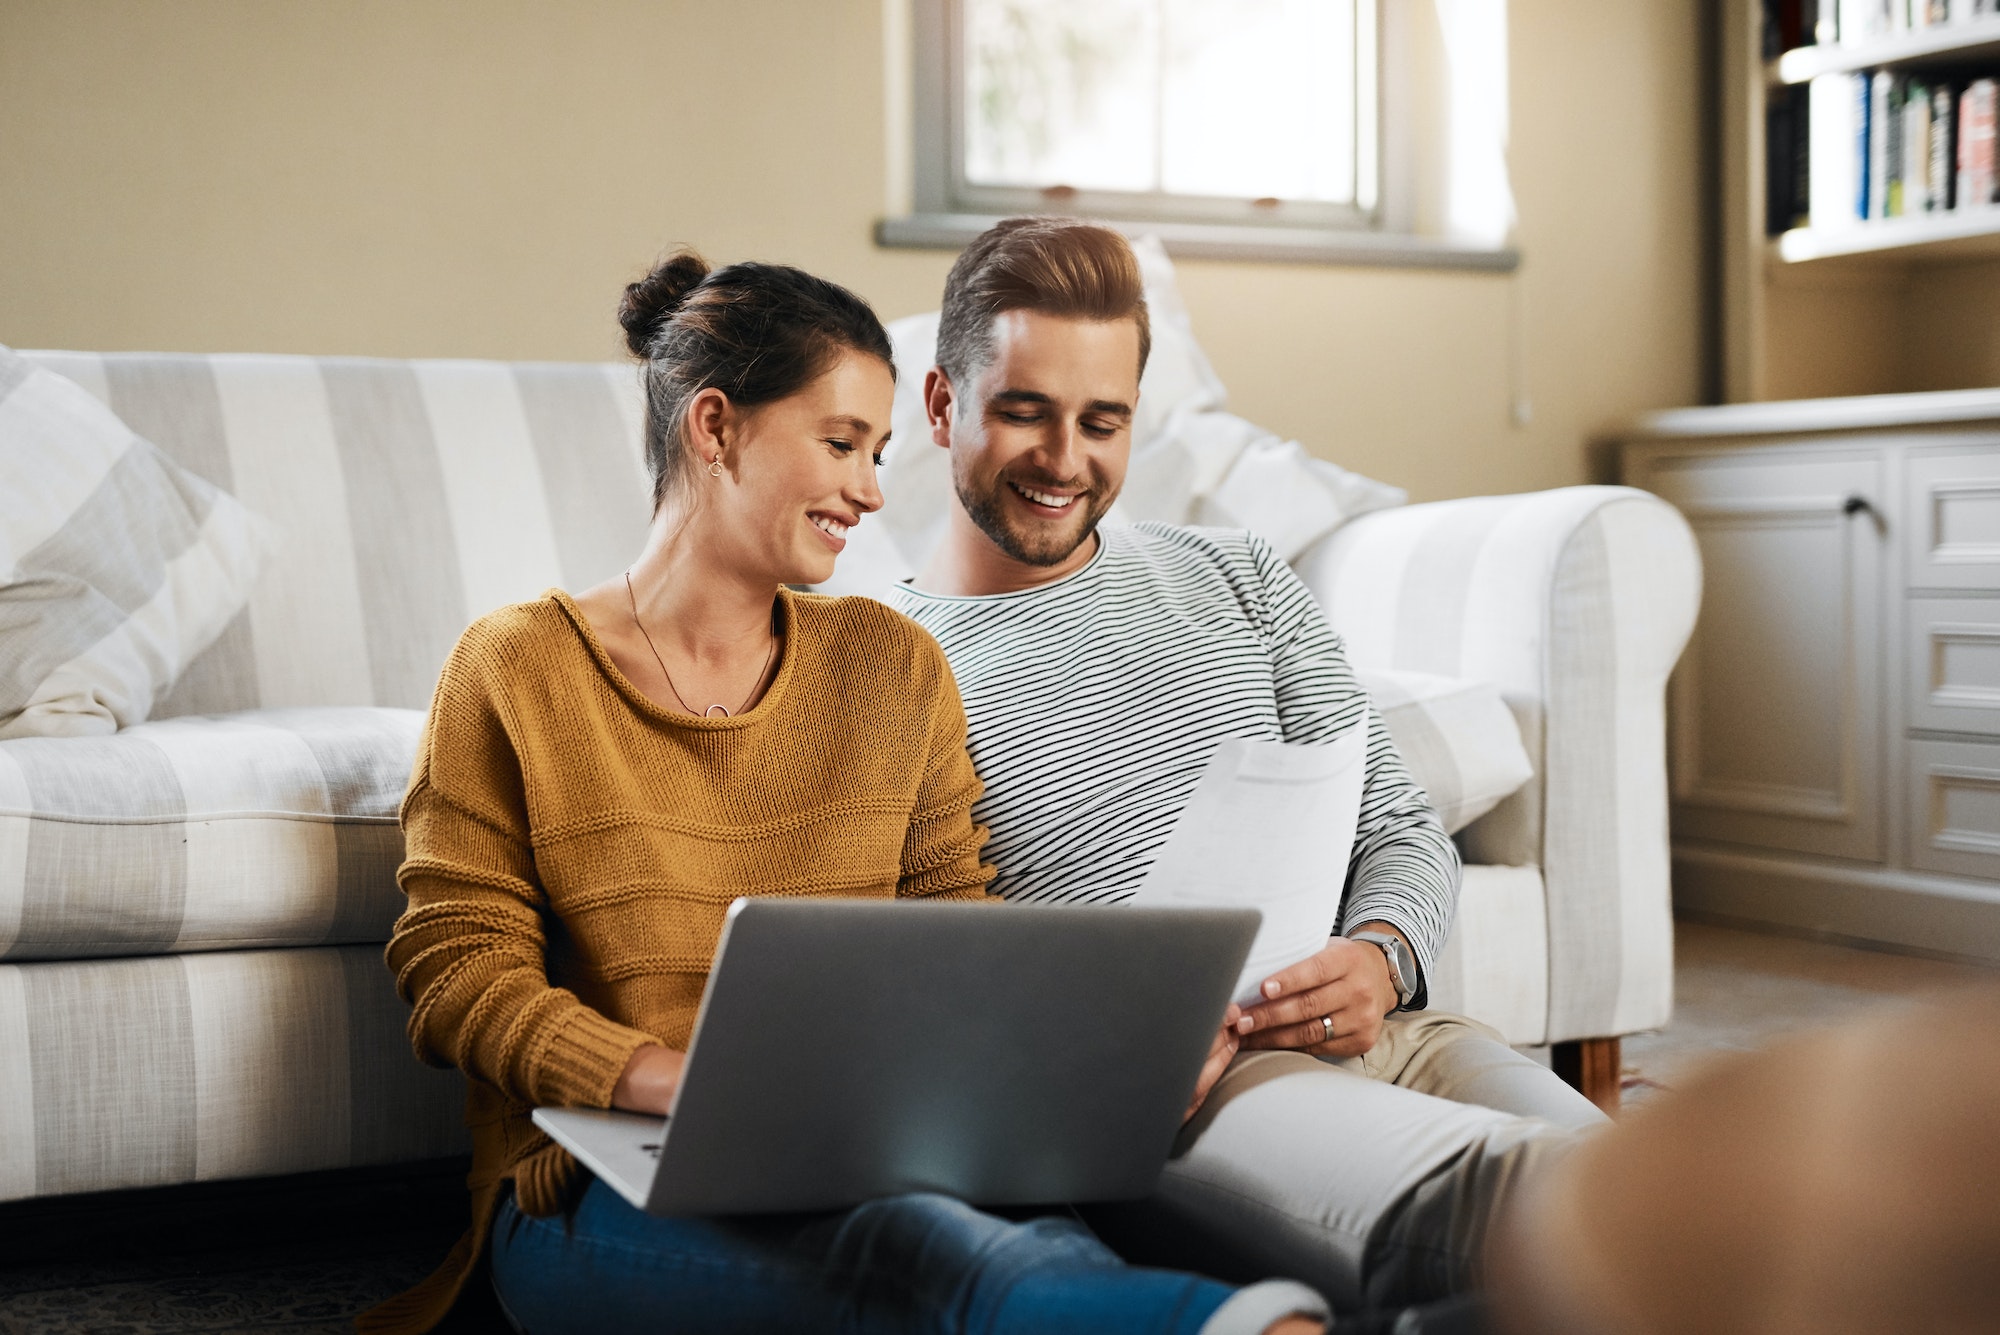 Lets check our credit score. Shot of a young couple using a laptop while relaxing at home.